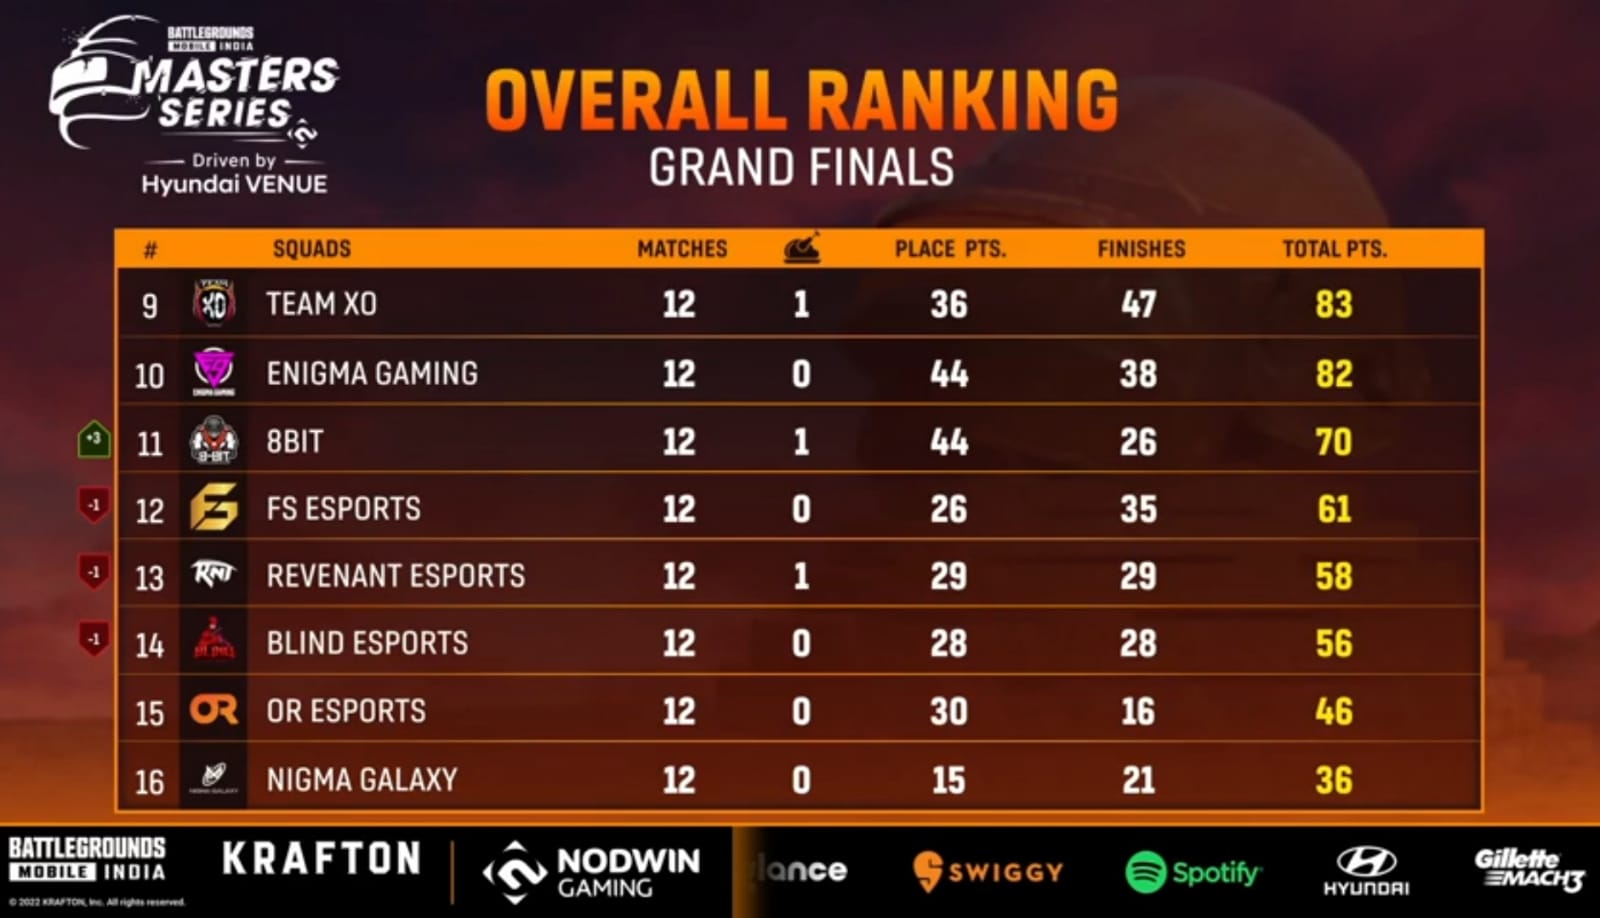 BGMS Grand Finals Day 3 Live results are out as Team SouL finally climbs up to the top after the end of Day 3 of Grand Finals